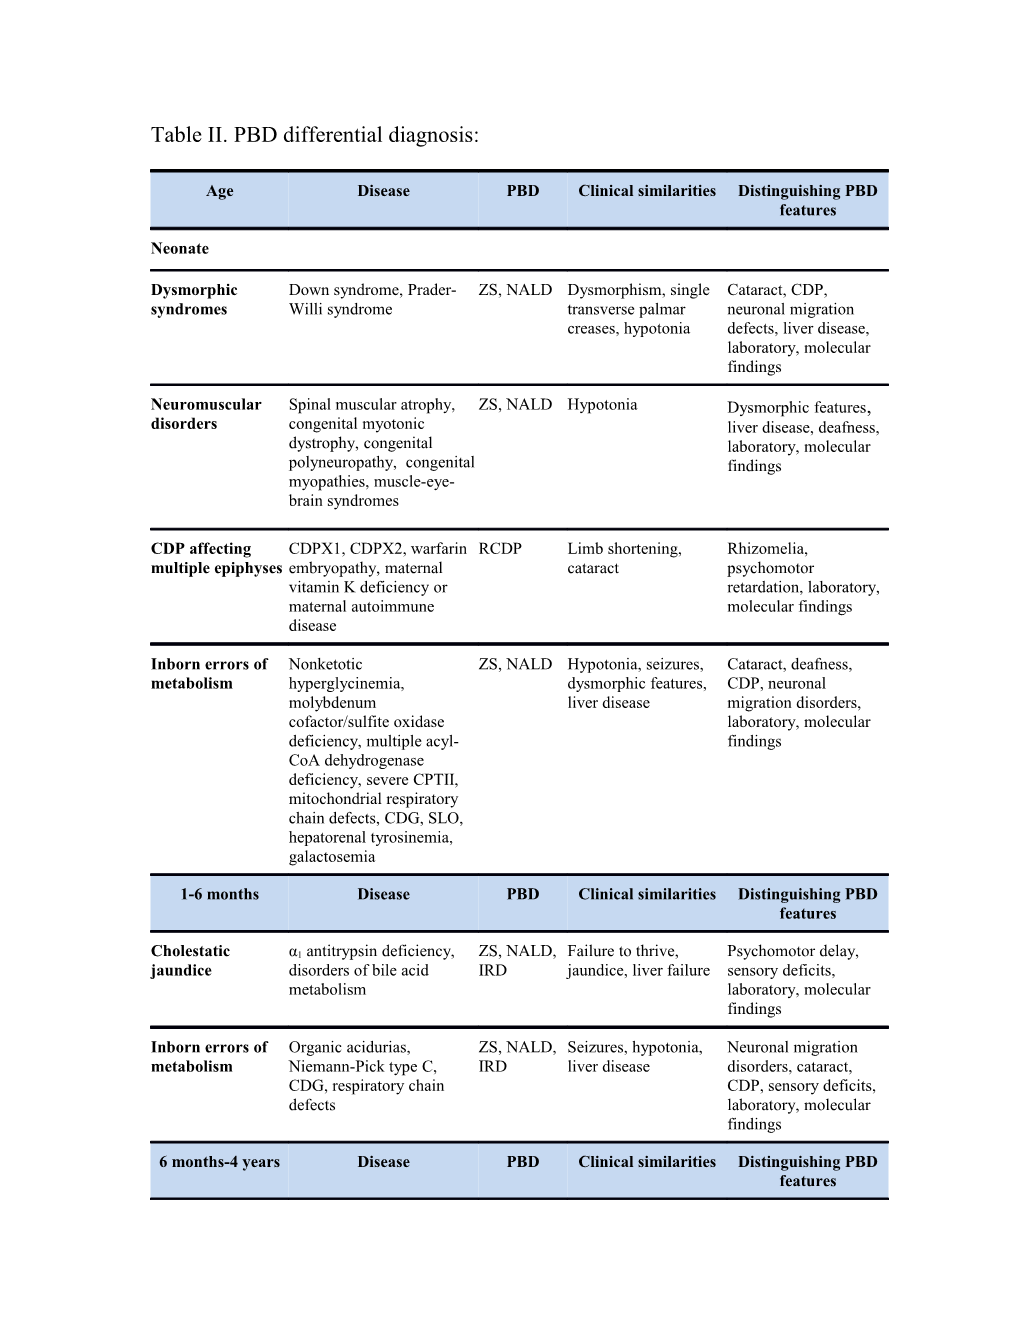 Table I I. PBD Differential Diagnosis